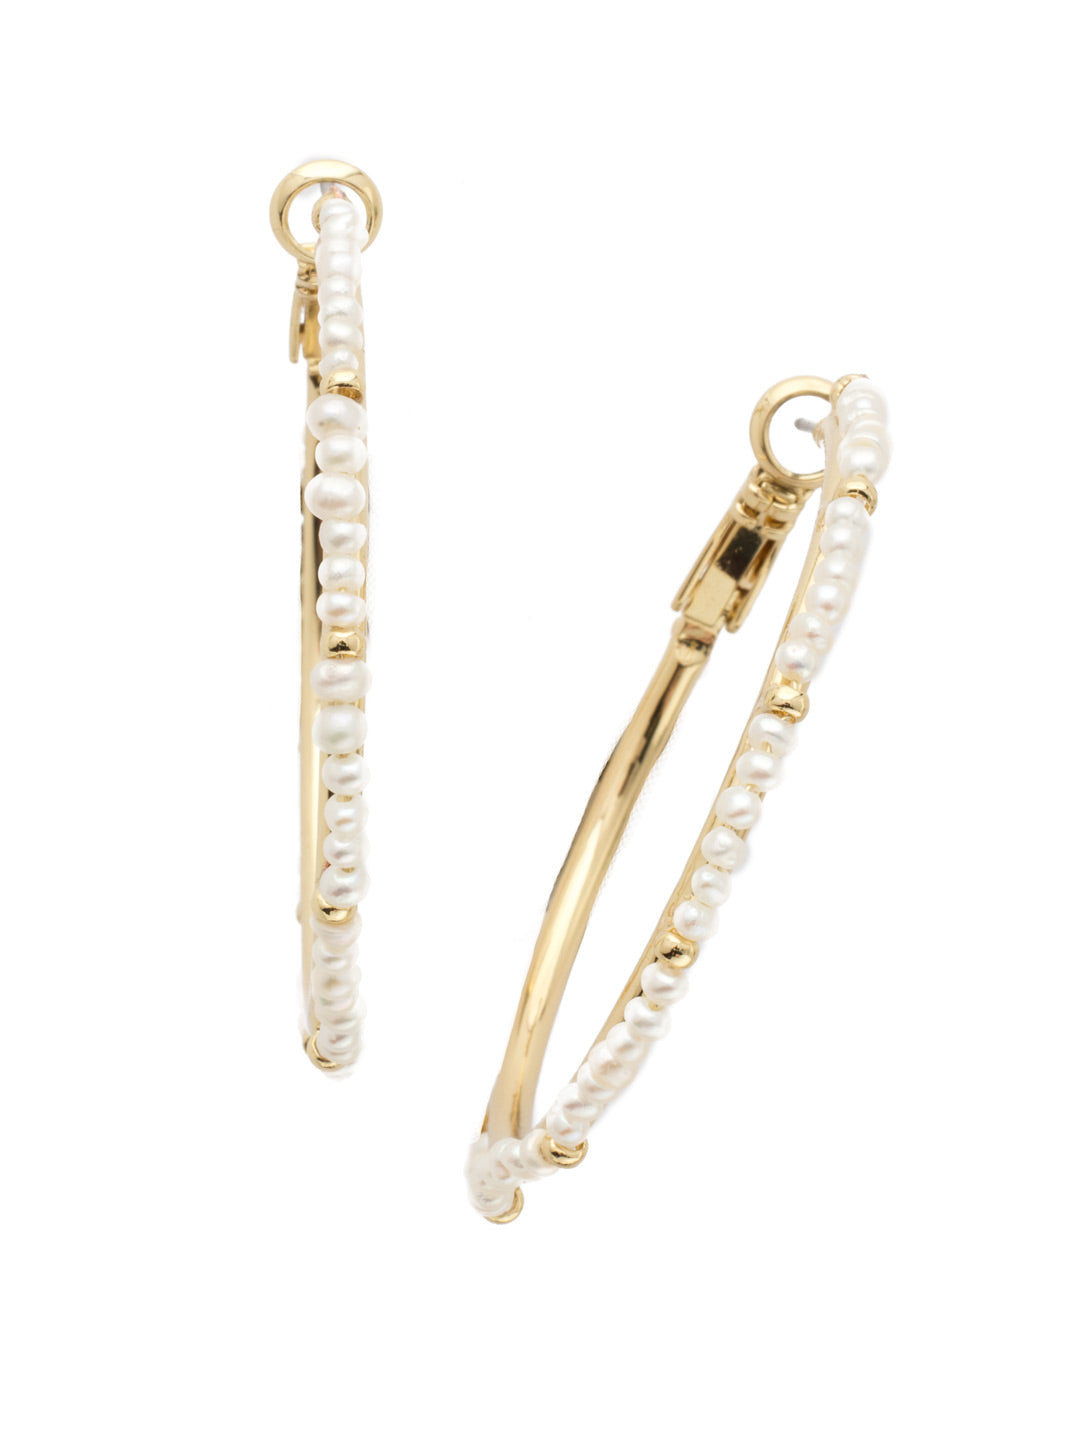 Elena Hoop Earrings - EEC12BGPLP - <p>Quite the polished pair! These slender hoops are embellished with petite beads for an elegant addition. From Sorrelli's Polished Pearl collection in our Bright Gold-tone finish.</p>